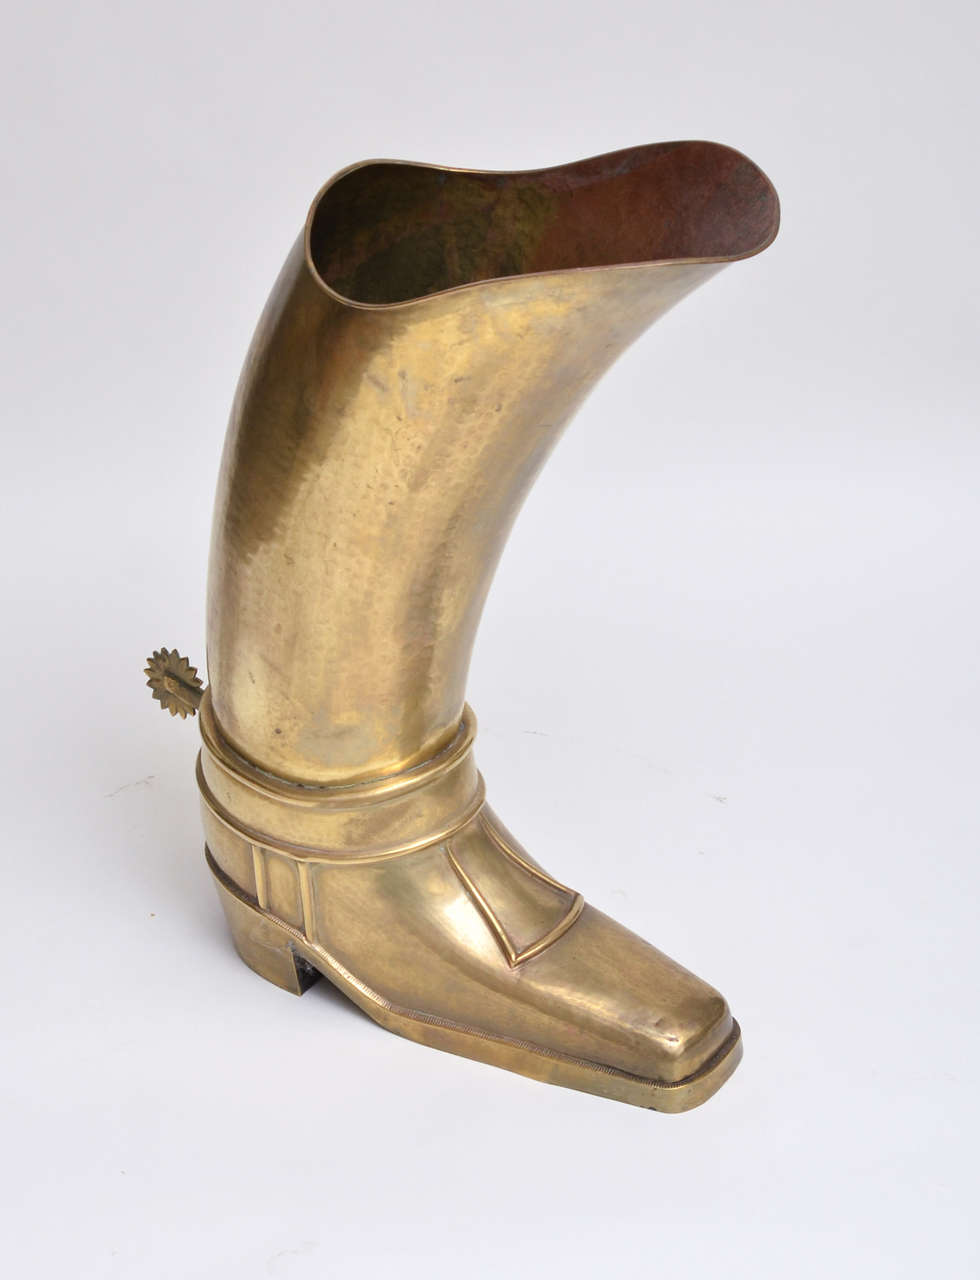 Hammered brass umbrella stand in the form of a cowboy boot.